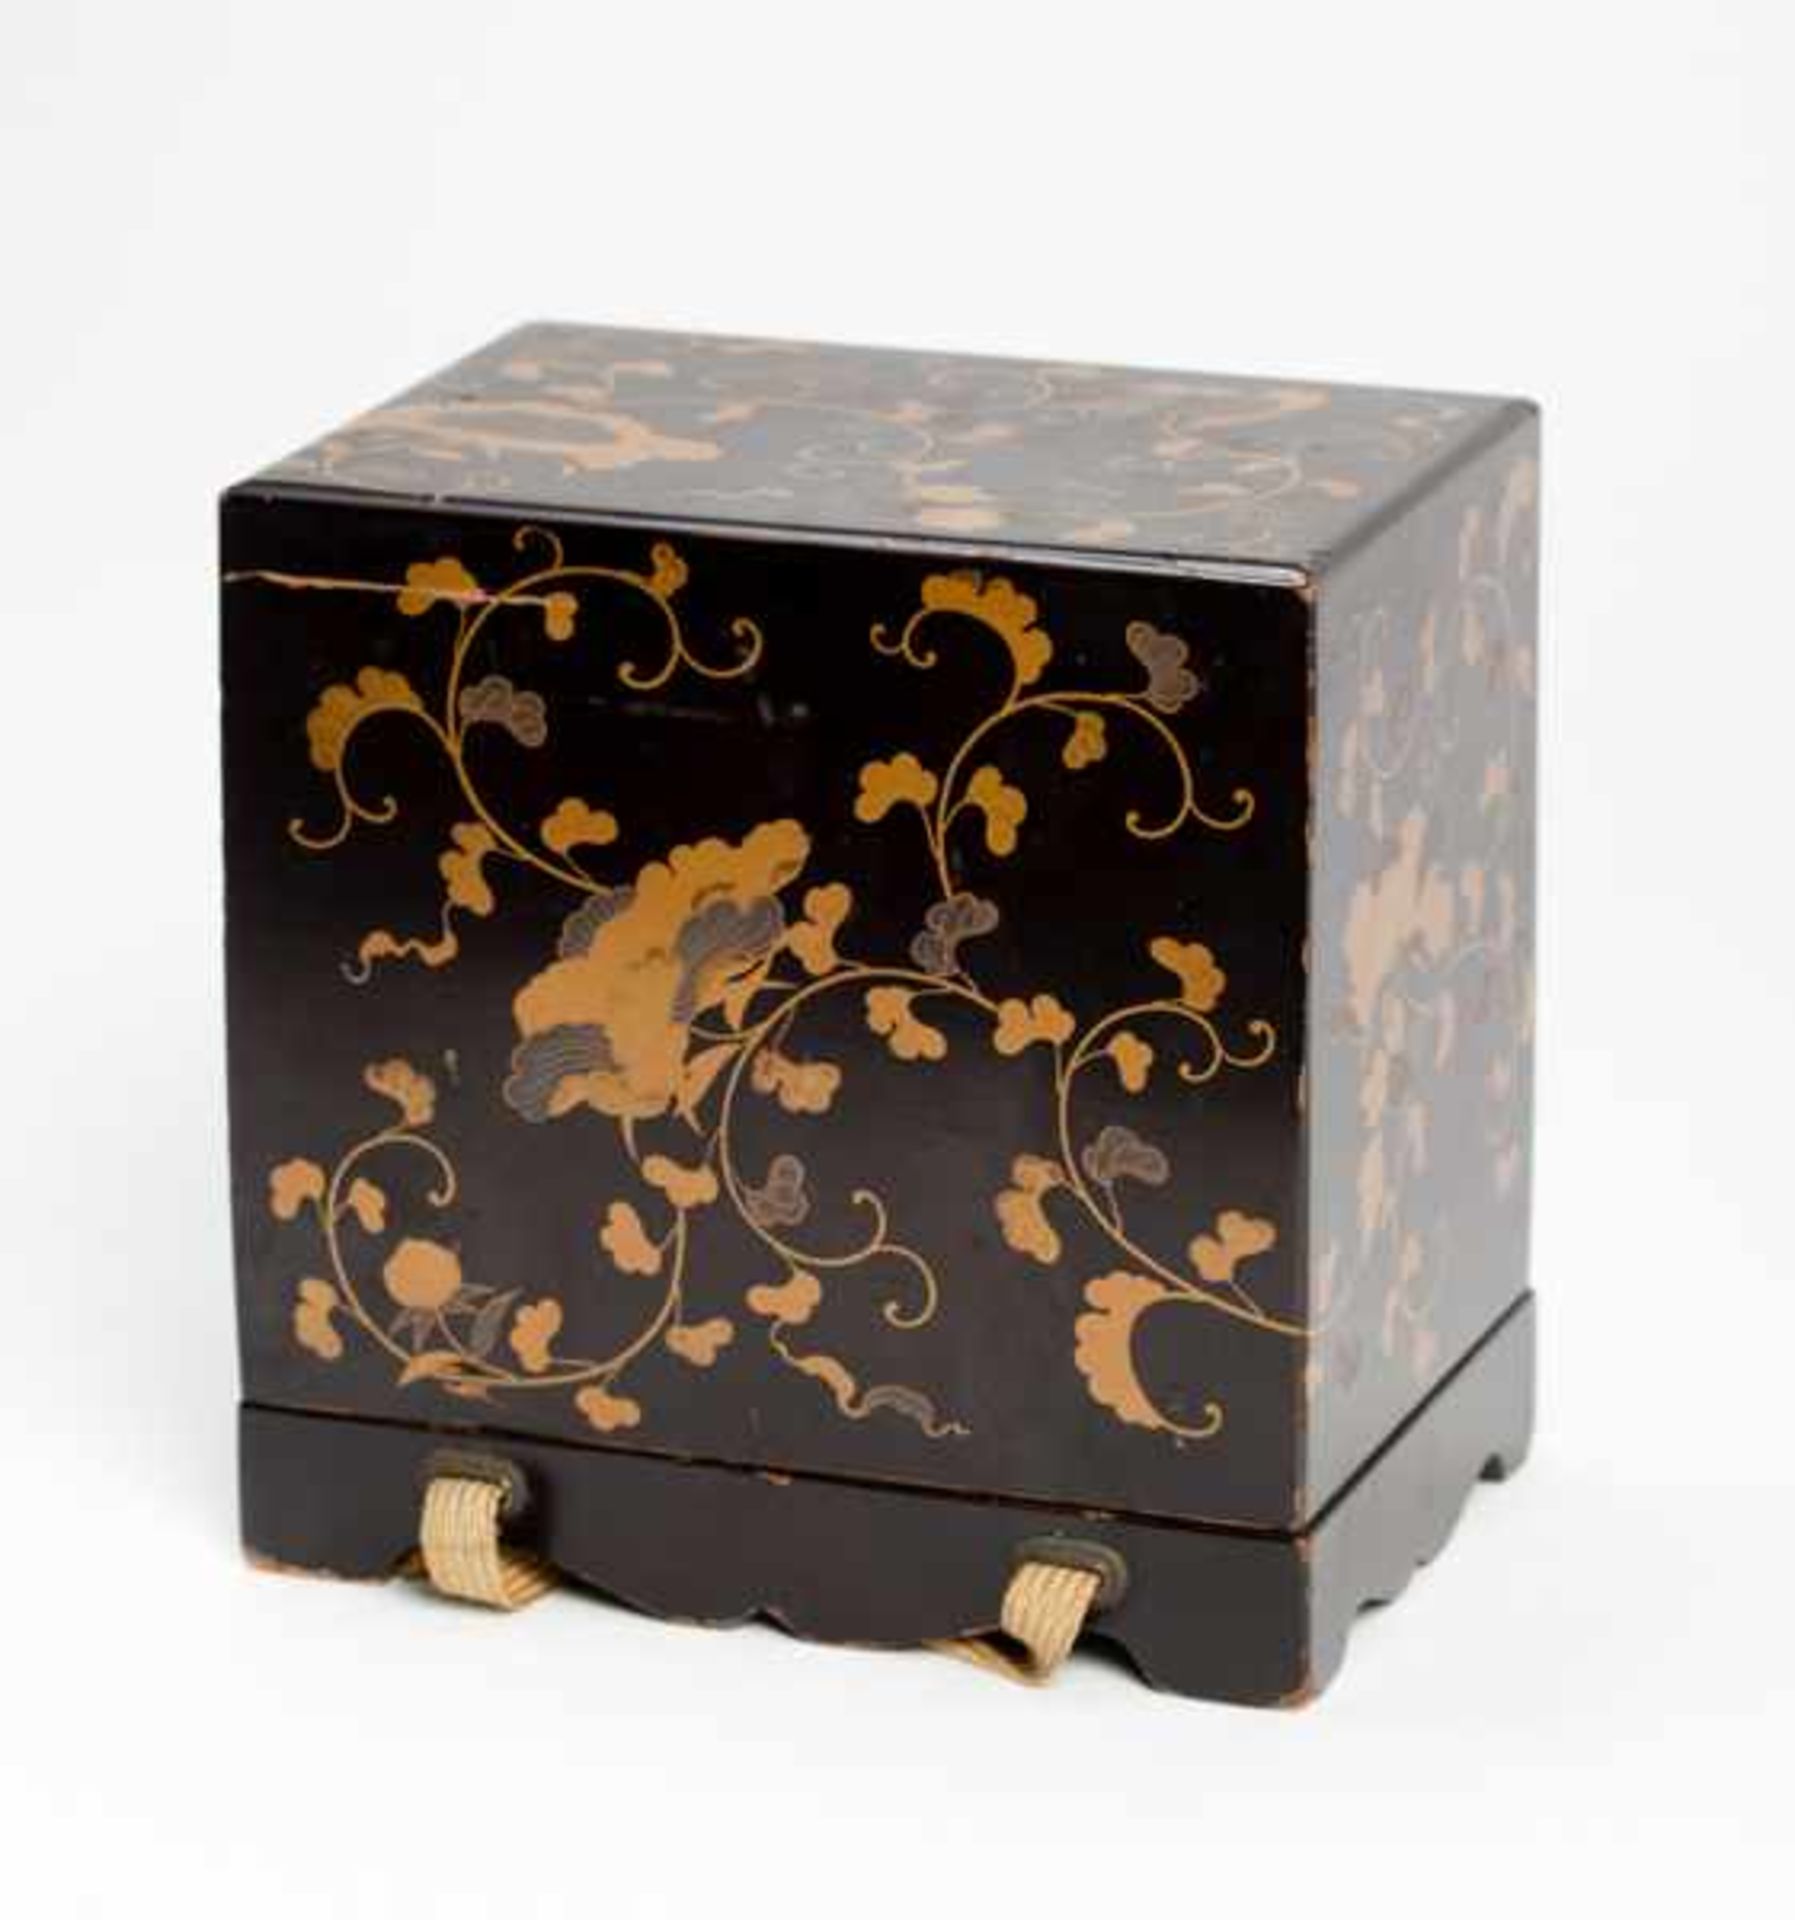 RARE SMALL BOX WITH UTAGARUTA PLAYING CARDS Lacquer, gold, silver and paint. Japan, 19th century - Image 6 of 7